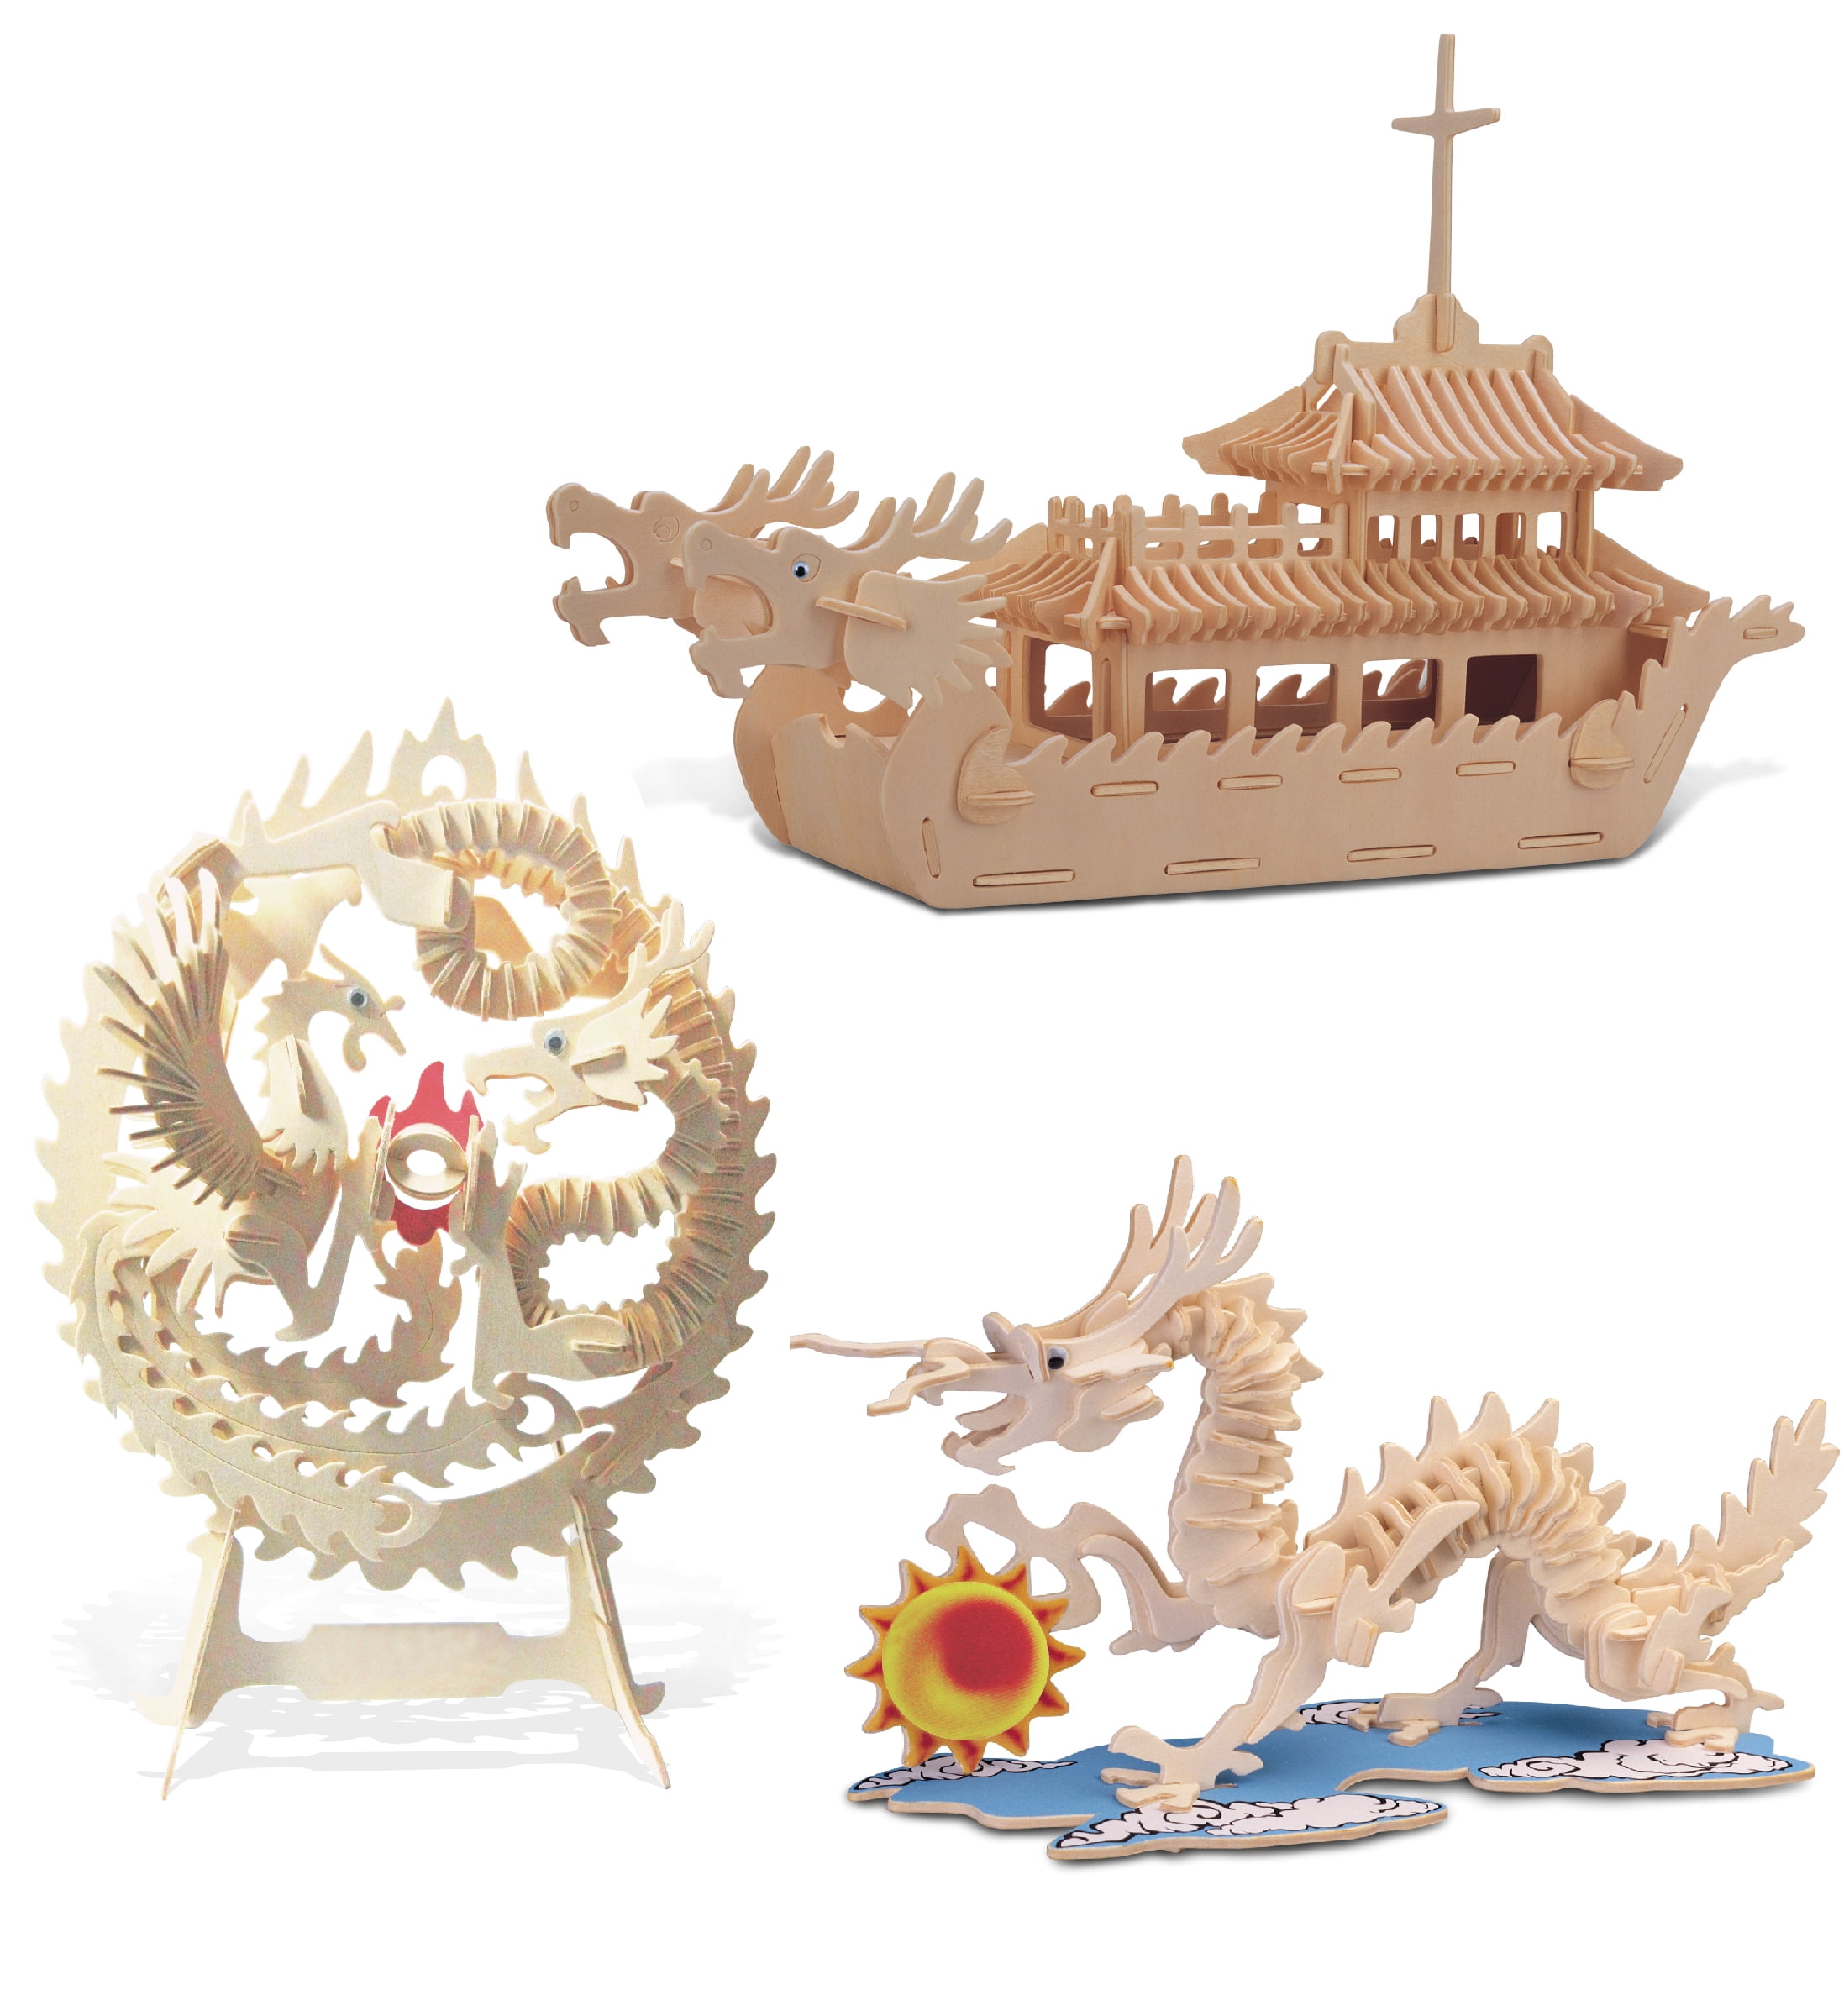 Puzzled Bundle of Angel Fish 3 Pack Dolphin & Turtle Wooden 3D Puzzle Kits 